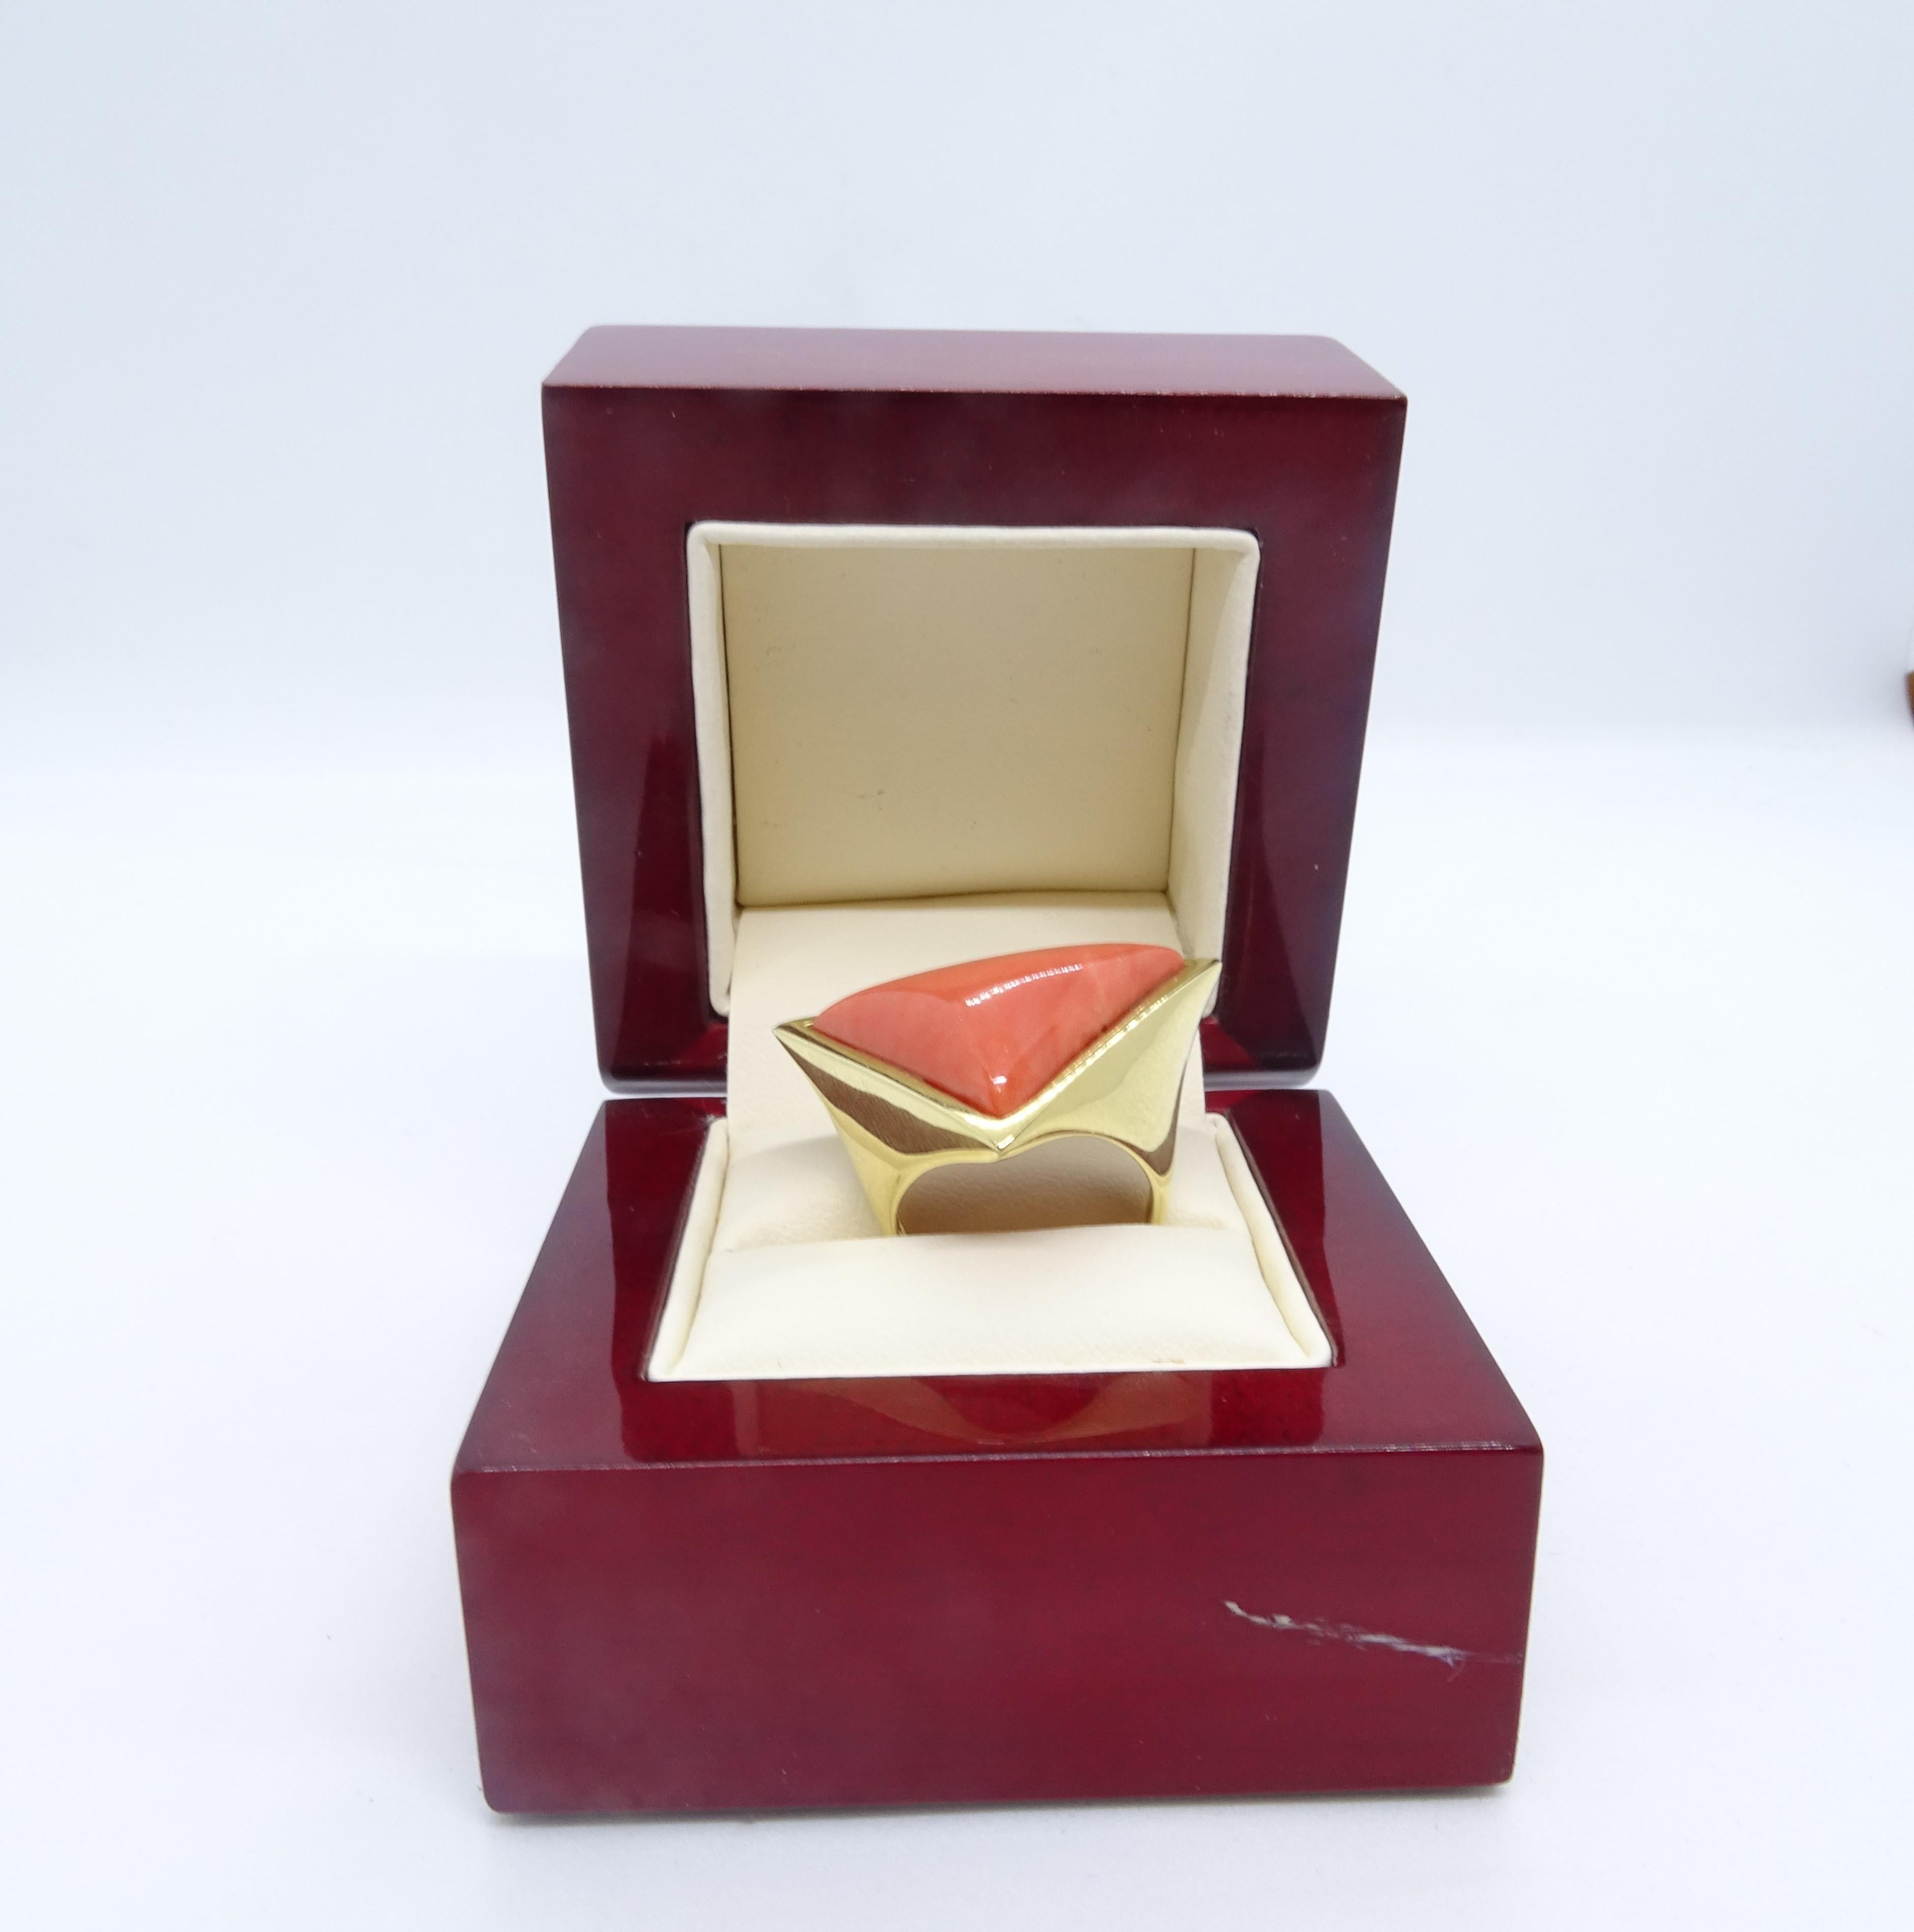 Exquisite 18-carat gold ring and a precious angel skin coral cabochon with a triangular profile.

It is an Italian ring with a contemporary design. The main stone is inscribed in an isosceles triangle formed by the very base of the jewel.

The total